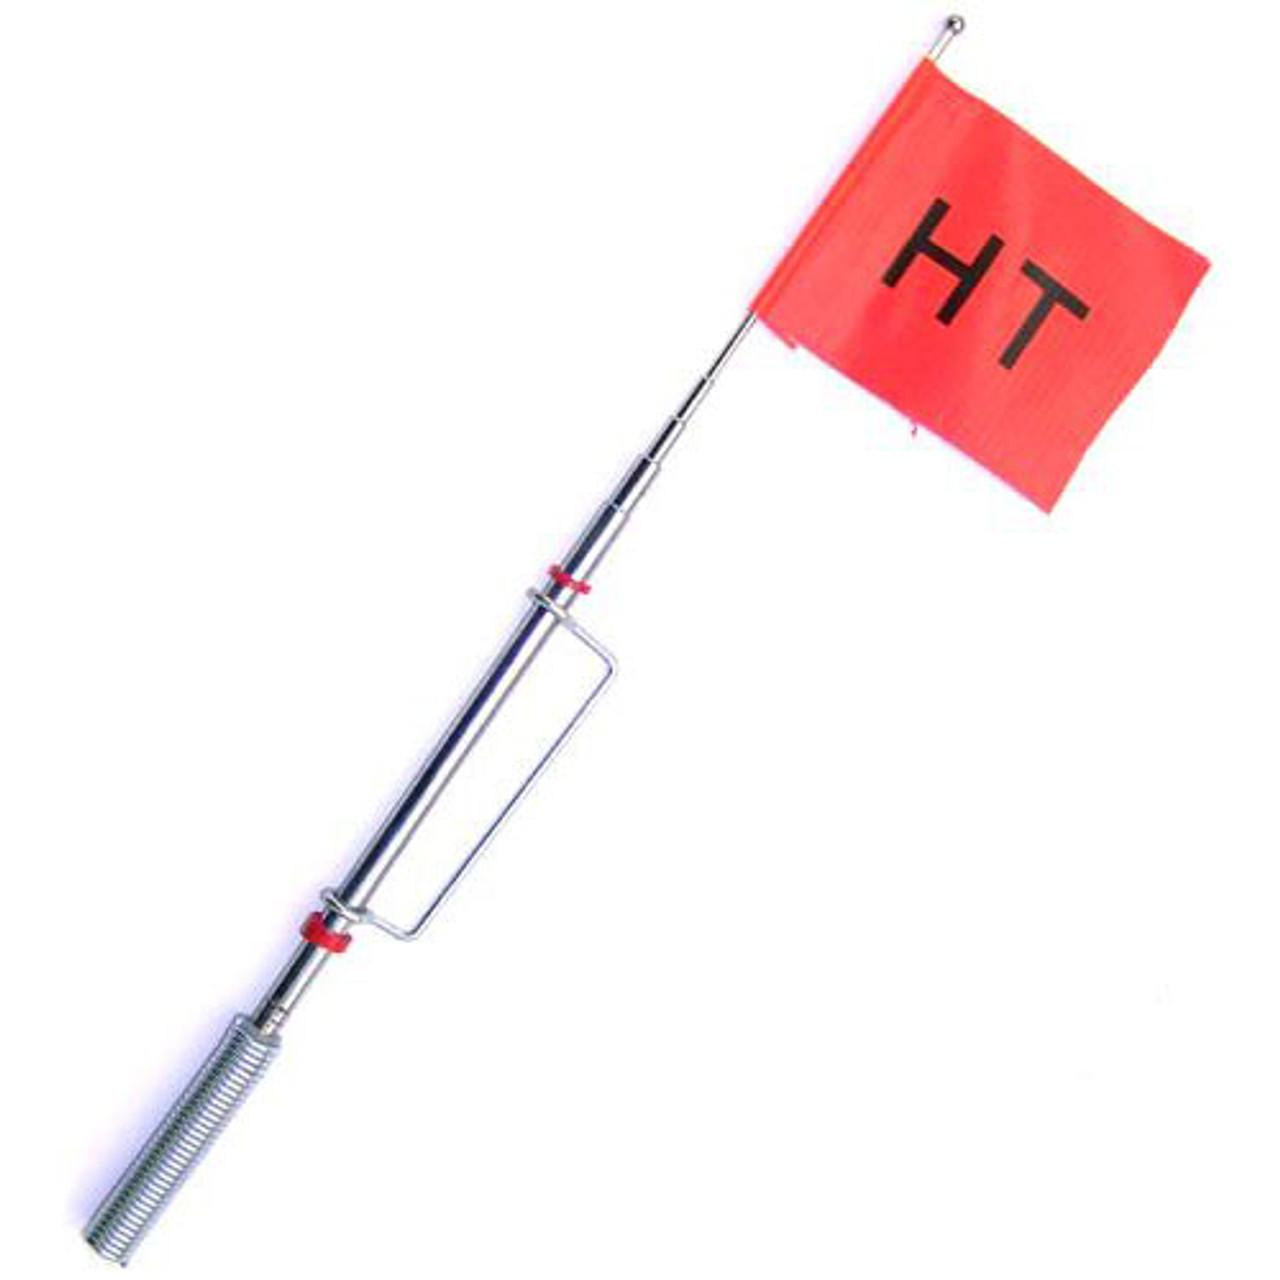 Beaver Dam Tip-Up Replacement Flags And Rod Assembly Acme, 50% OFF